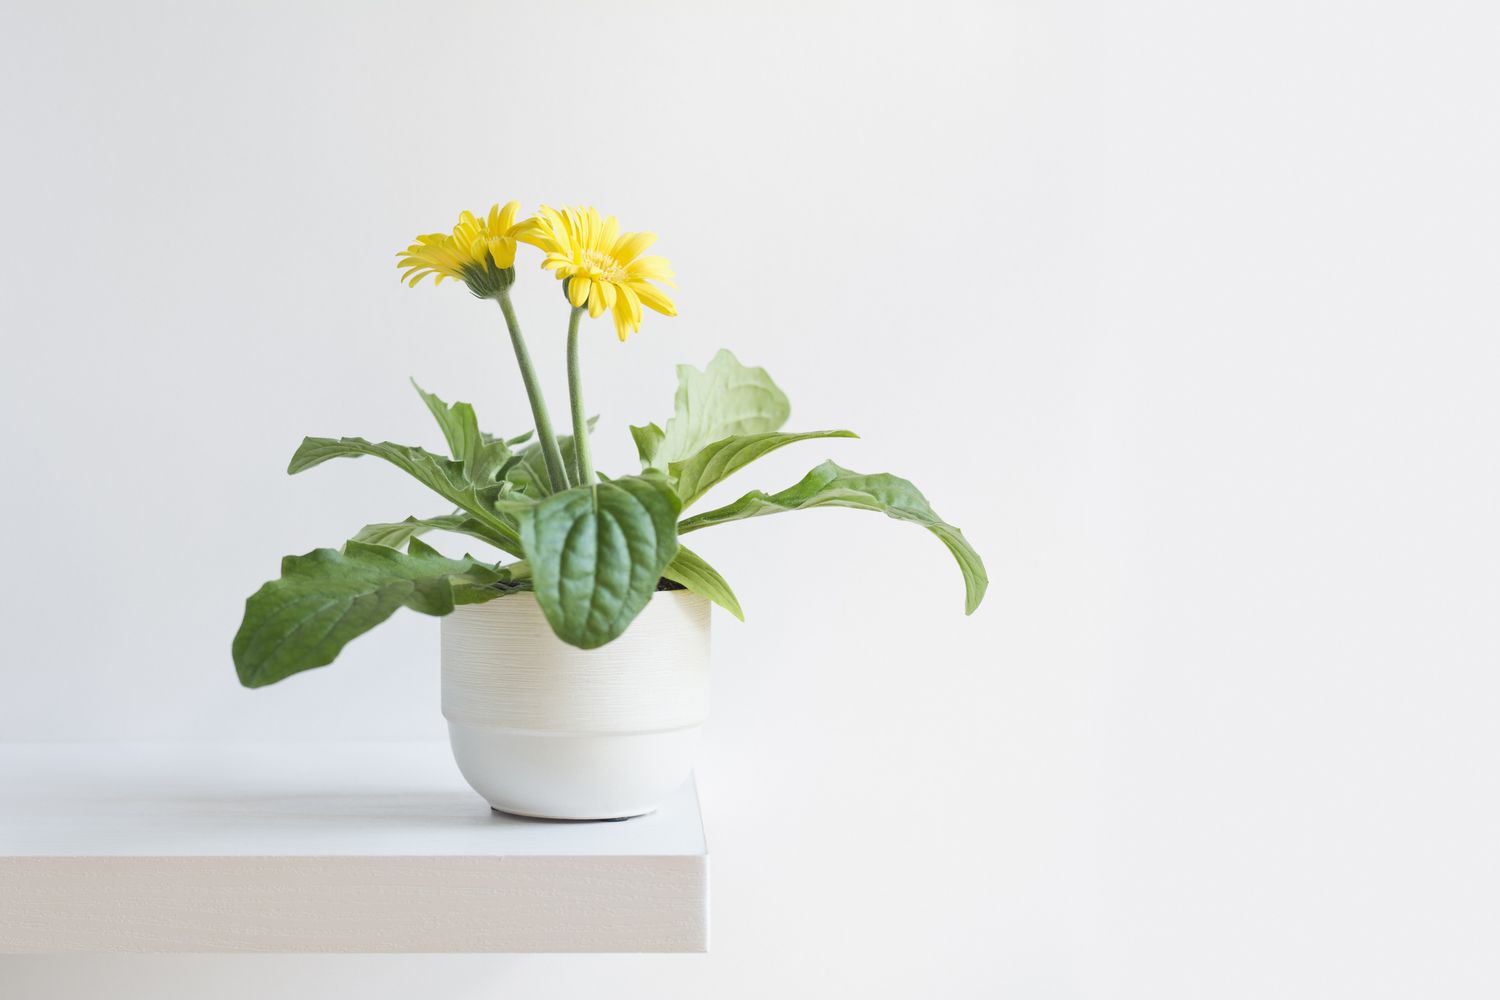 Blooming yellow gerbera daisy plant in white pot